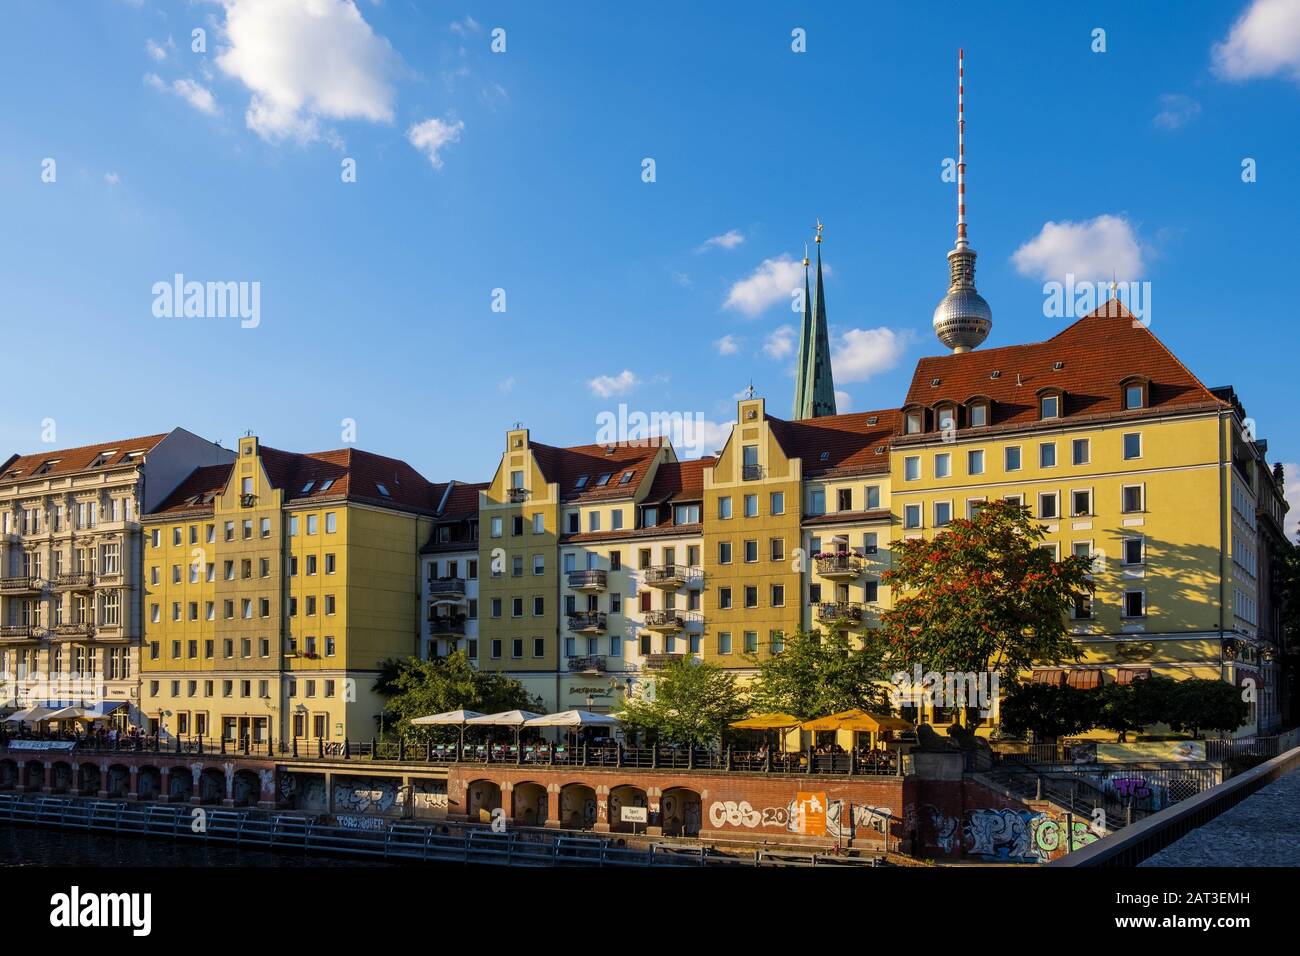 Berlin, Berlin state / Germany - 2018/07/24: Panoramic view of the Historic Mitte quarter of Berlin by the Spree river with Television Tower - Fernsehturm - in background Stock Photo